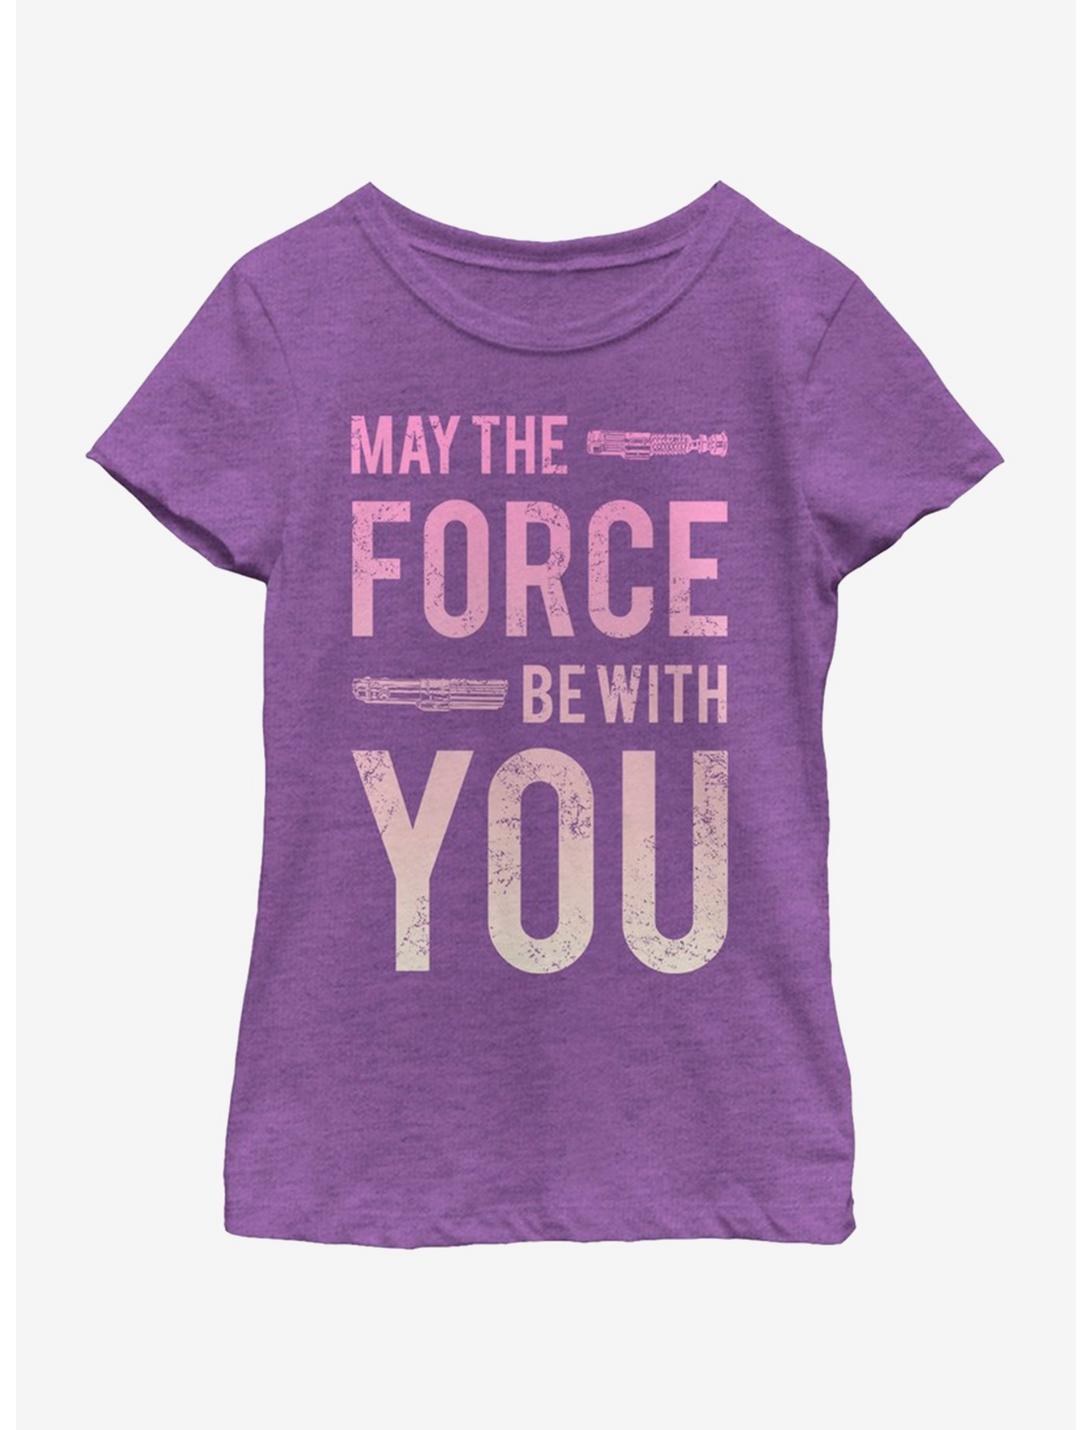 Star Wars With You Youth Girls T-Shirt, PURPLE BERRY, hi-res